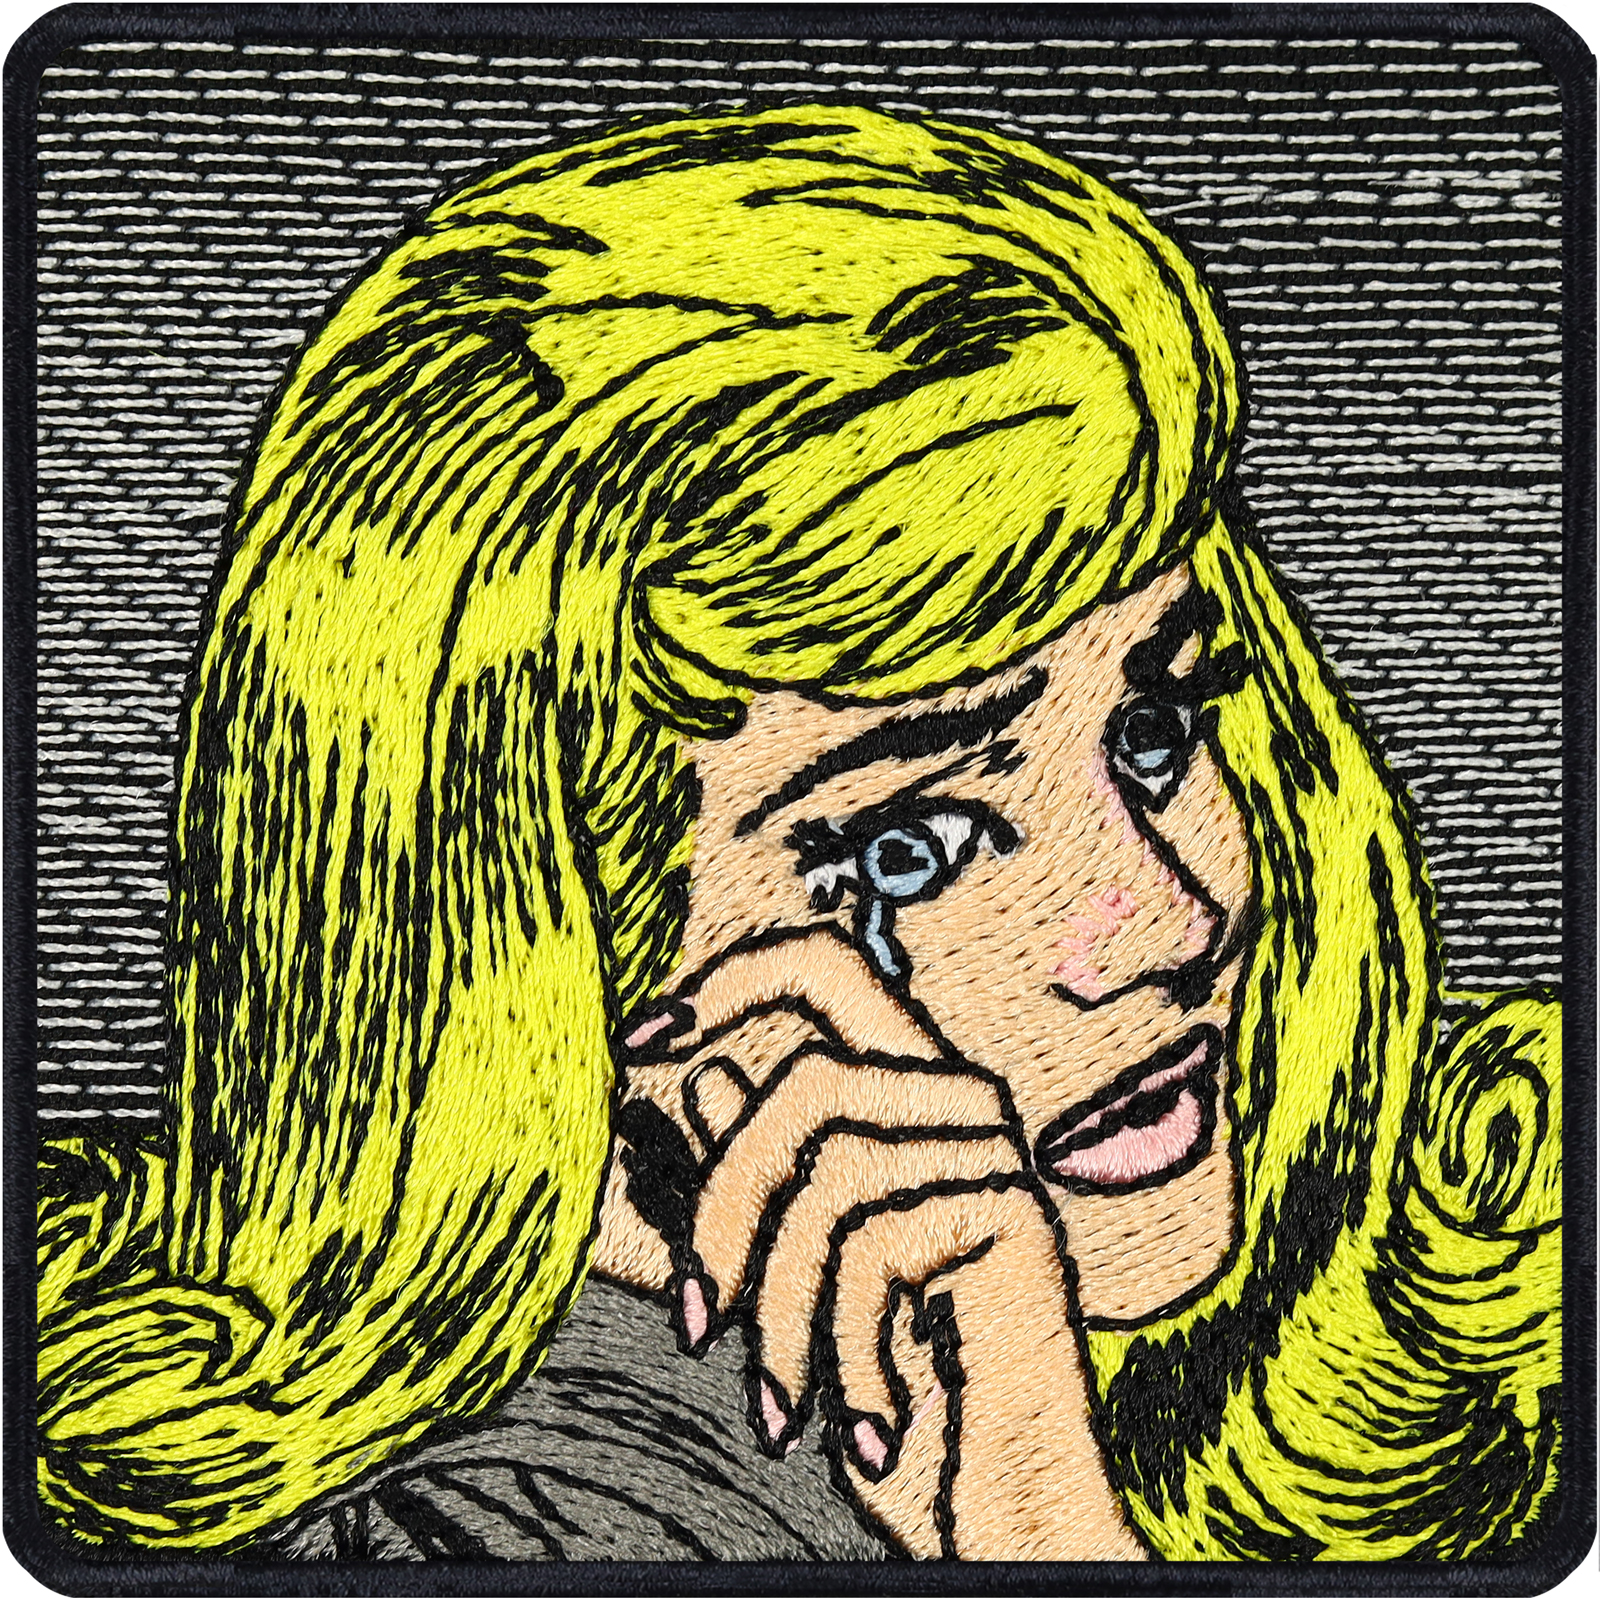 Crying girl comis - Patch